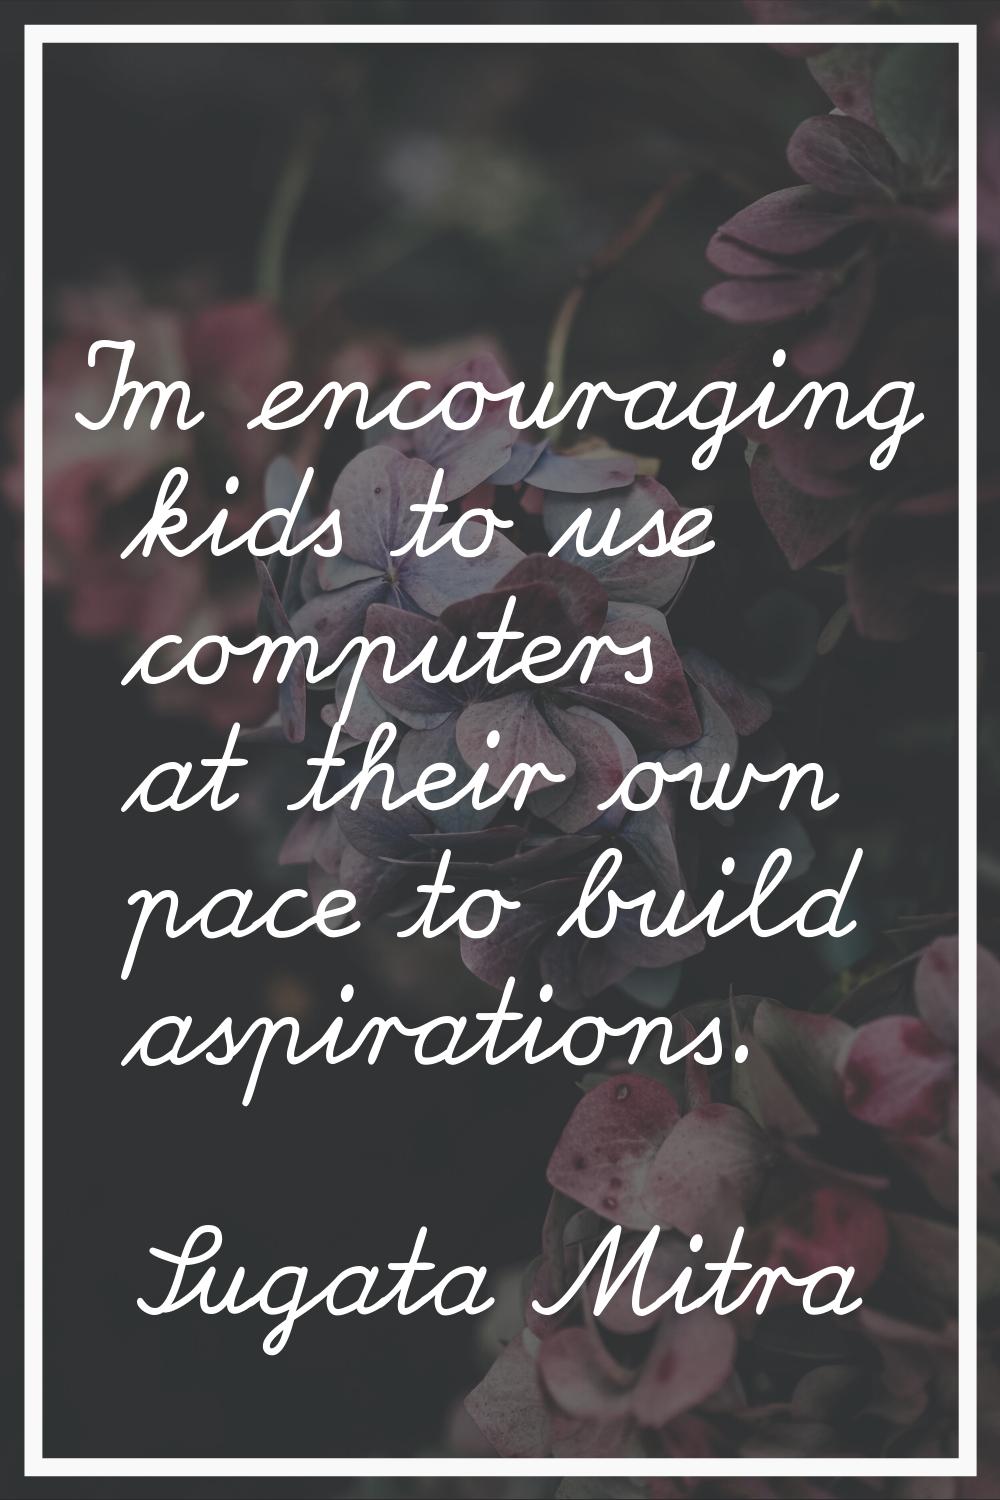 I'm encouraging kids to use computers at their own pace to build aspirations.